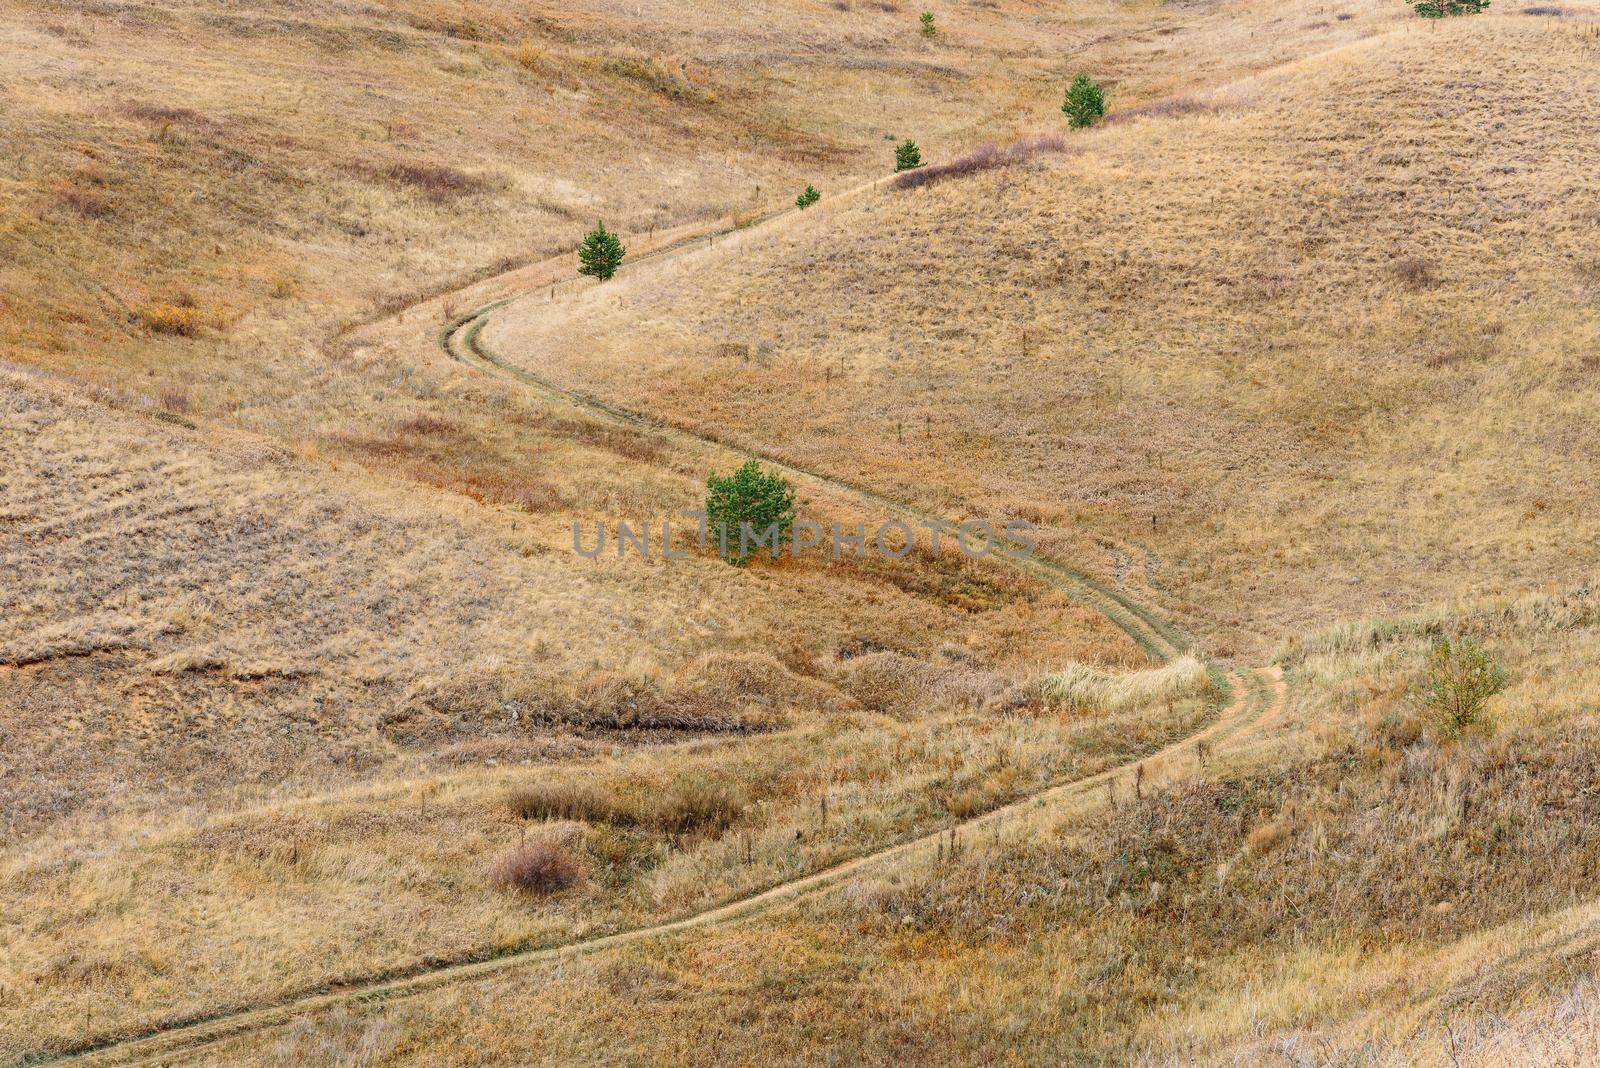 S curve of dirt road on the hillside